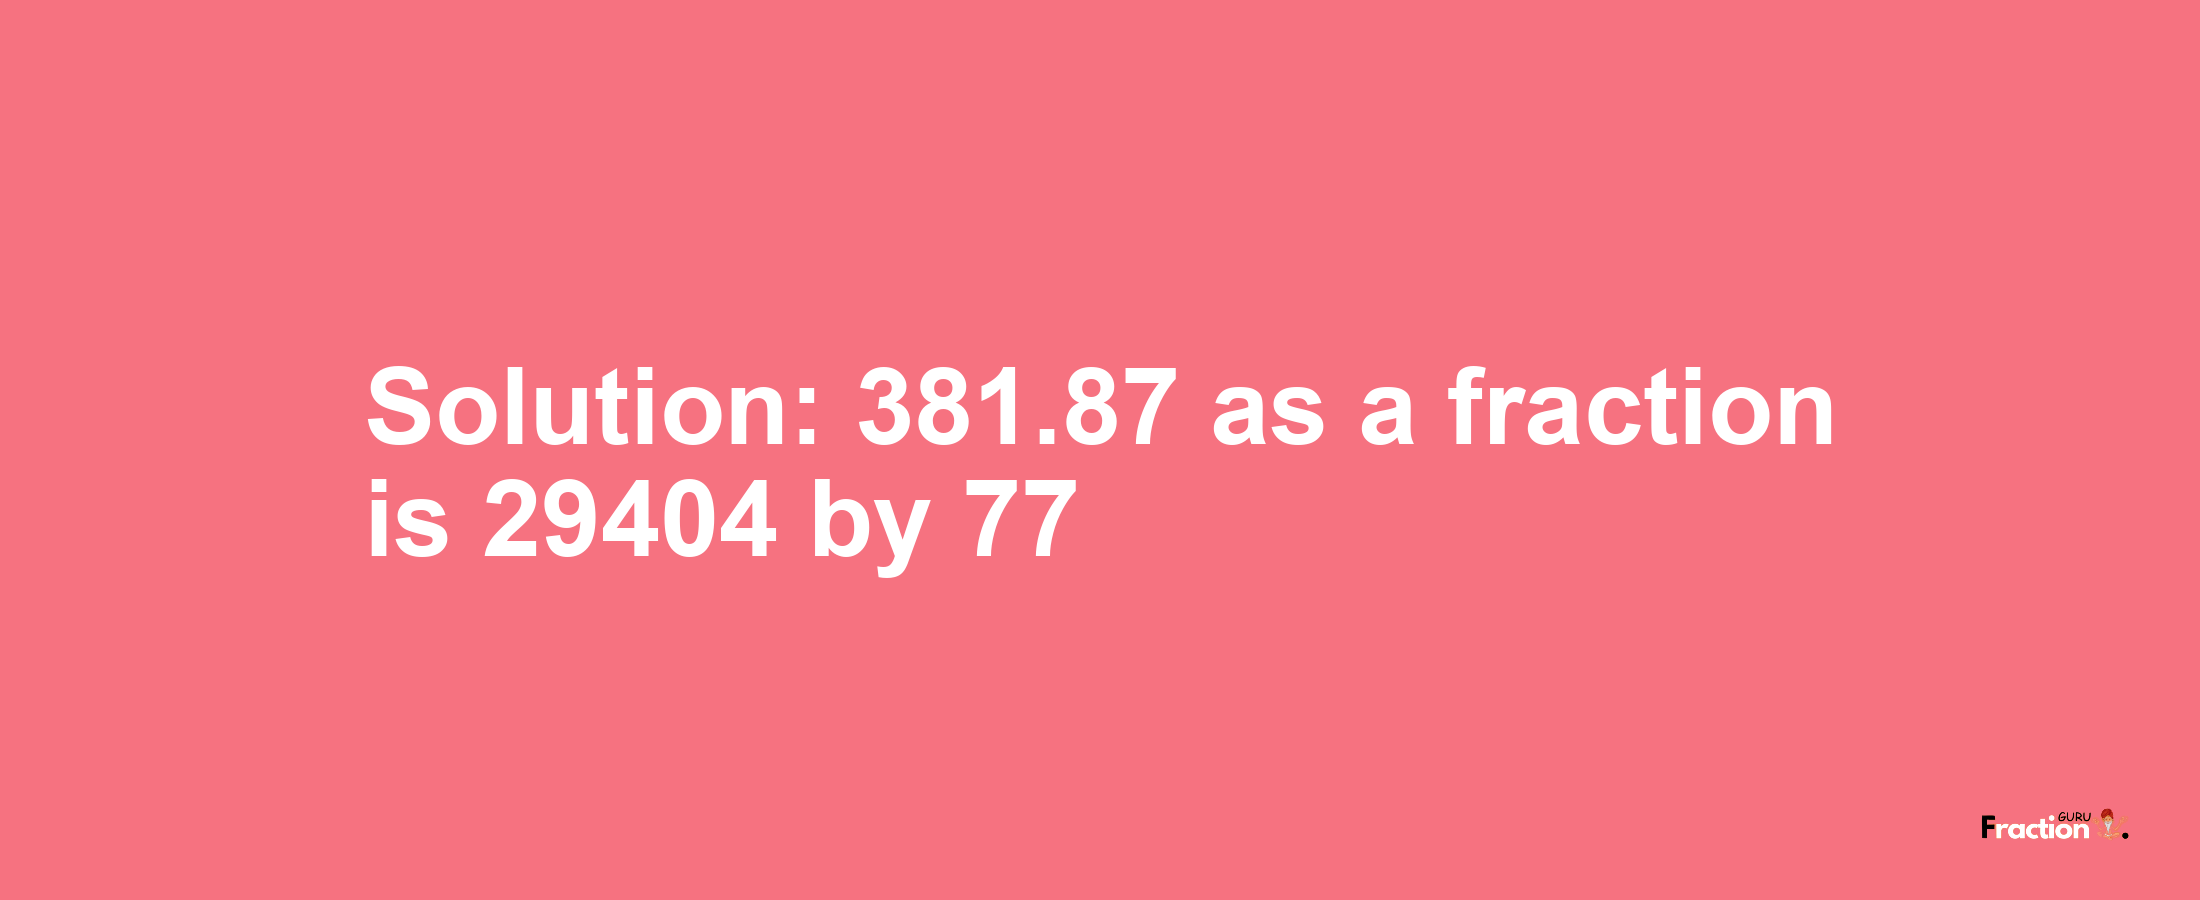 Solution:381.87 as a fraction is 29404/77